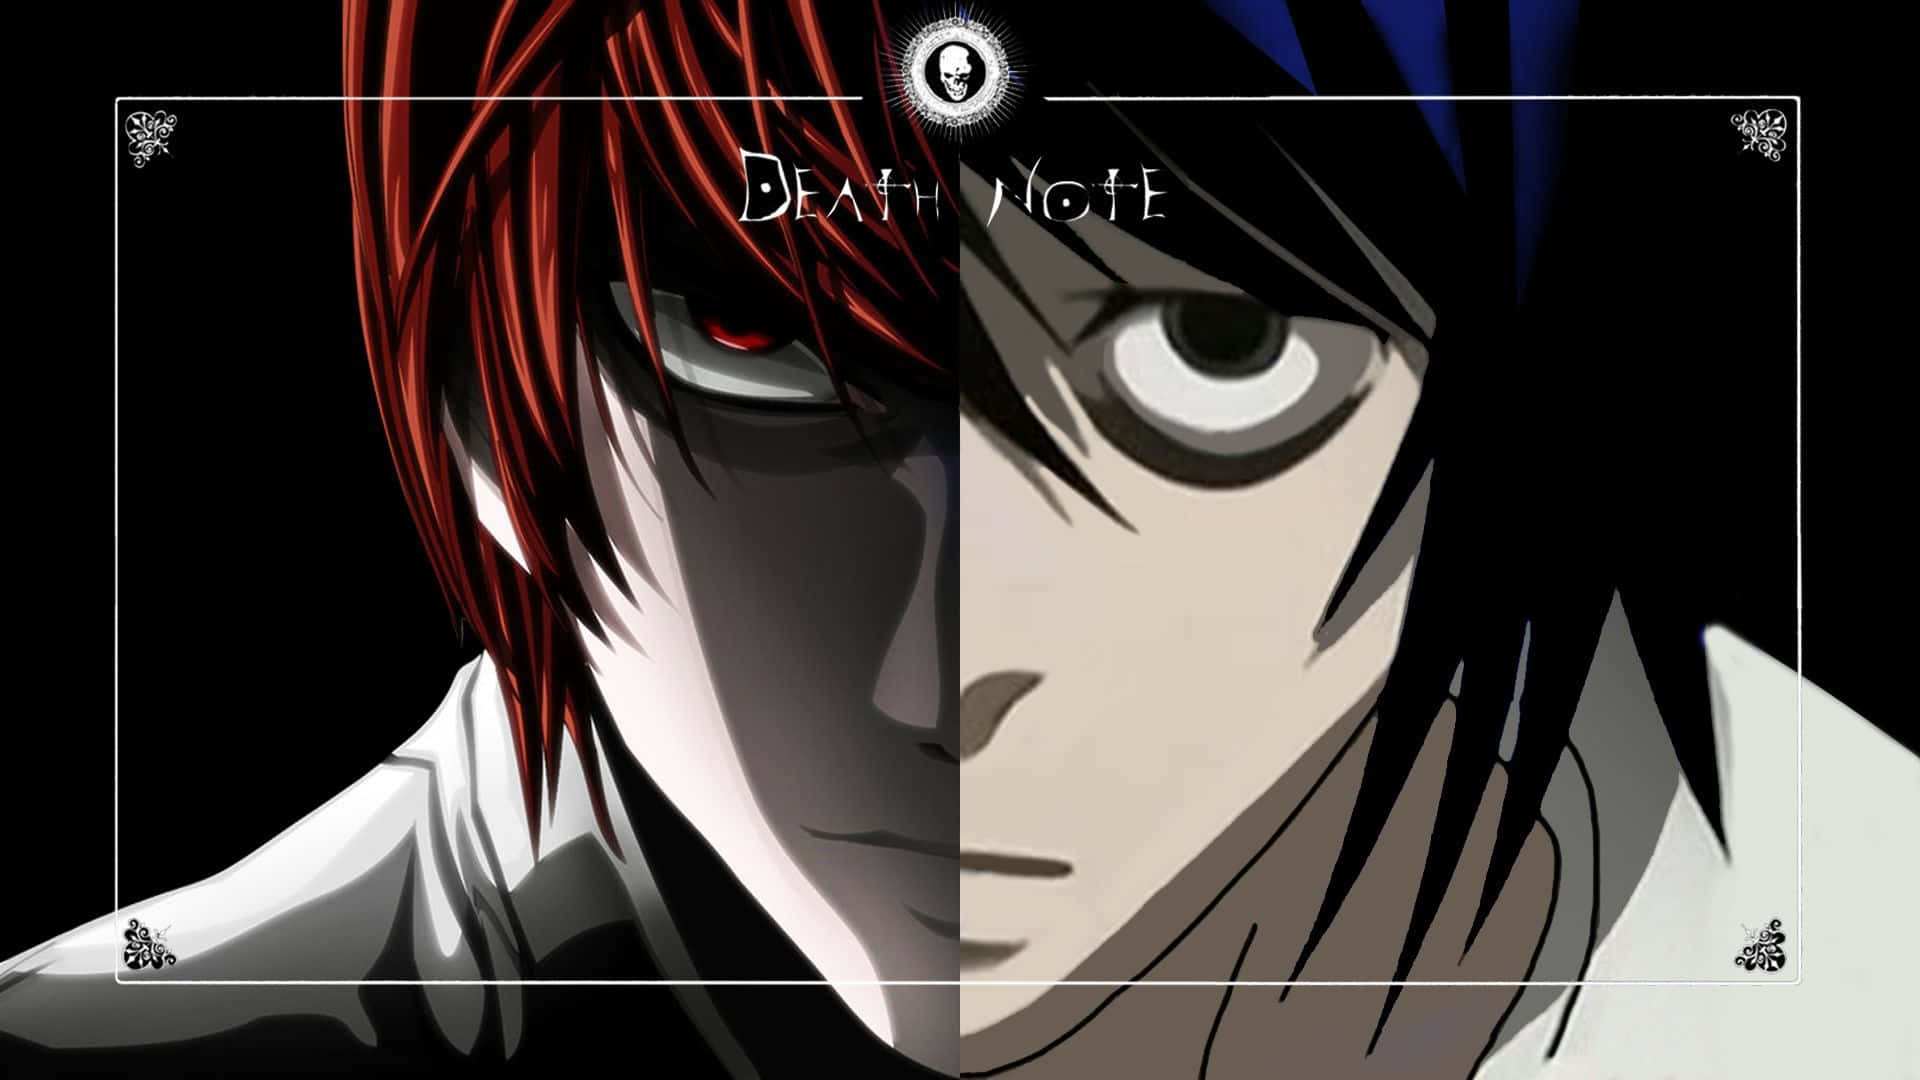 "Witness the intensity of Death Note 4K on your Screen" Wallpaper